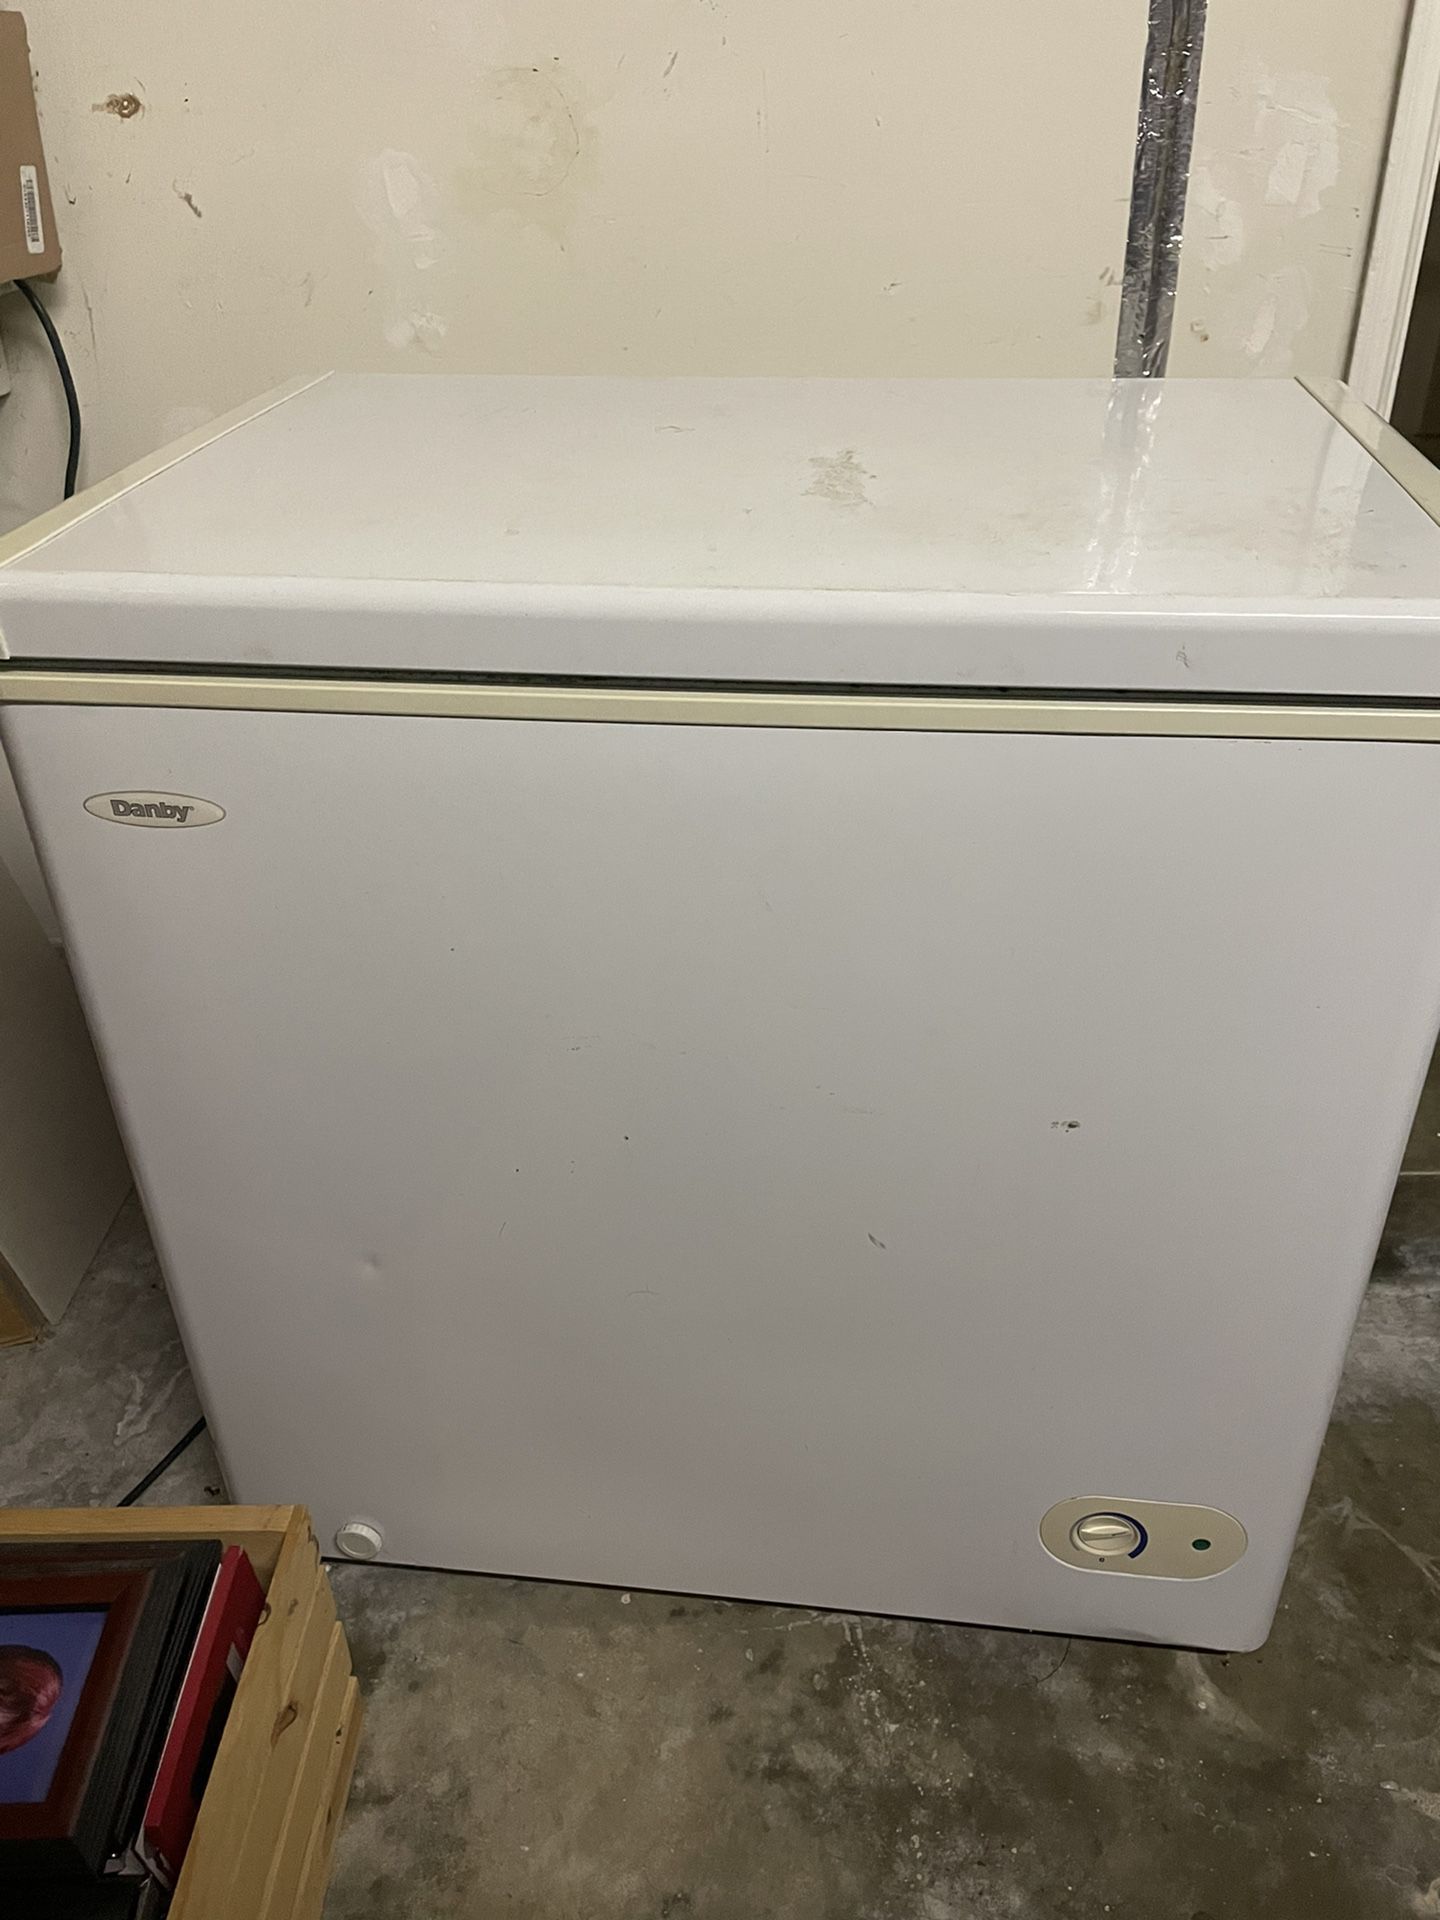 5.5 Cu Ft Chest Freezer By Danby